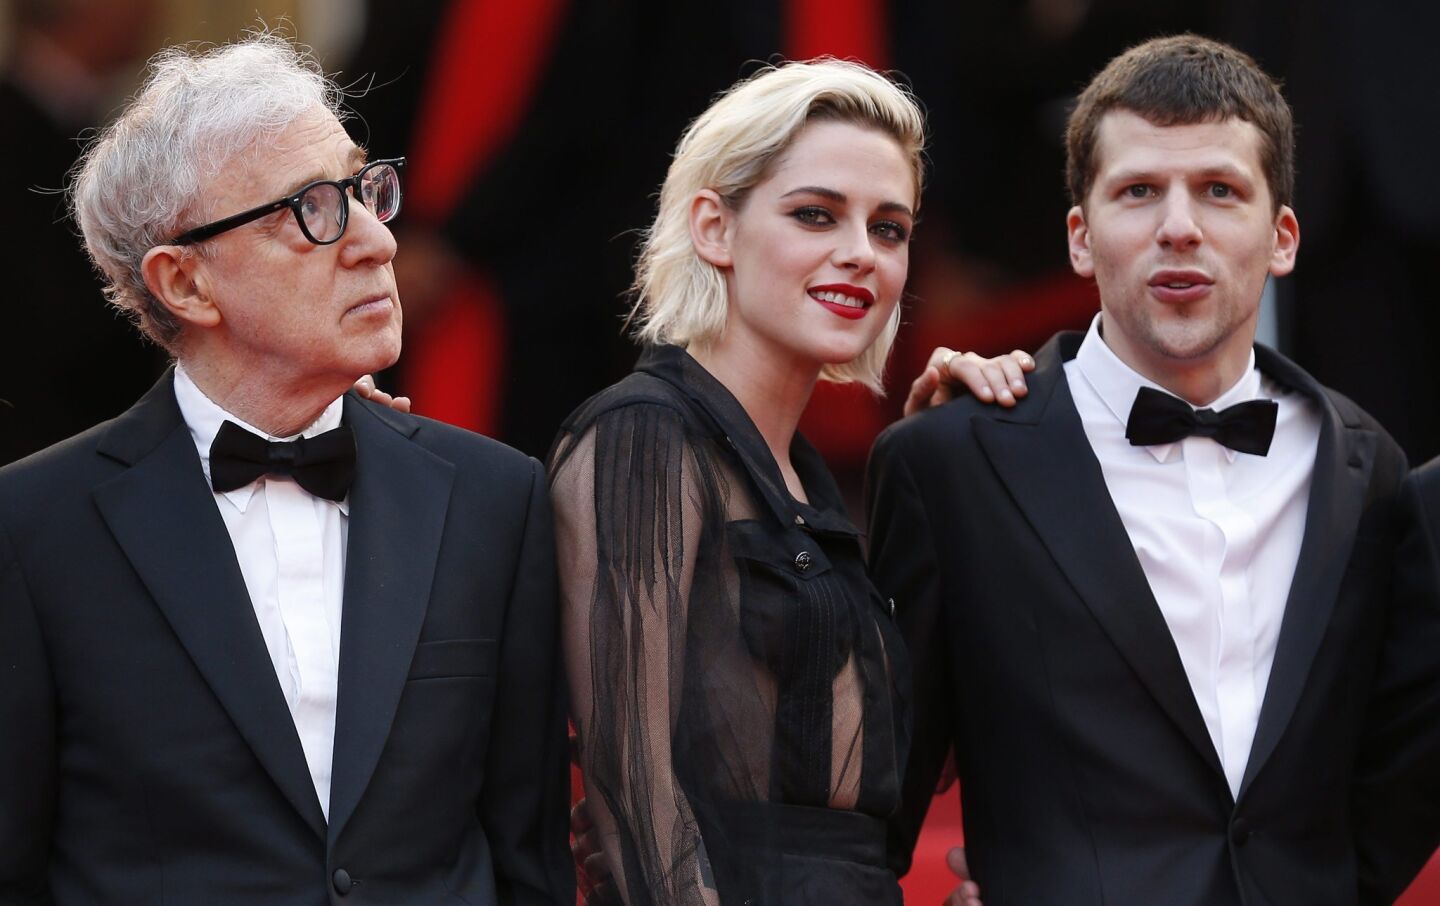 Director Woody Allen, actress Kristen Stewart and actor Jesse Eisenberg arrive for the screening of "Cafe Society"and the opening ceremony.